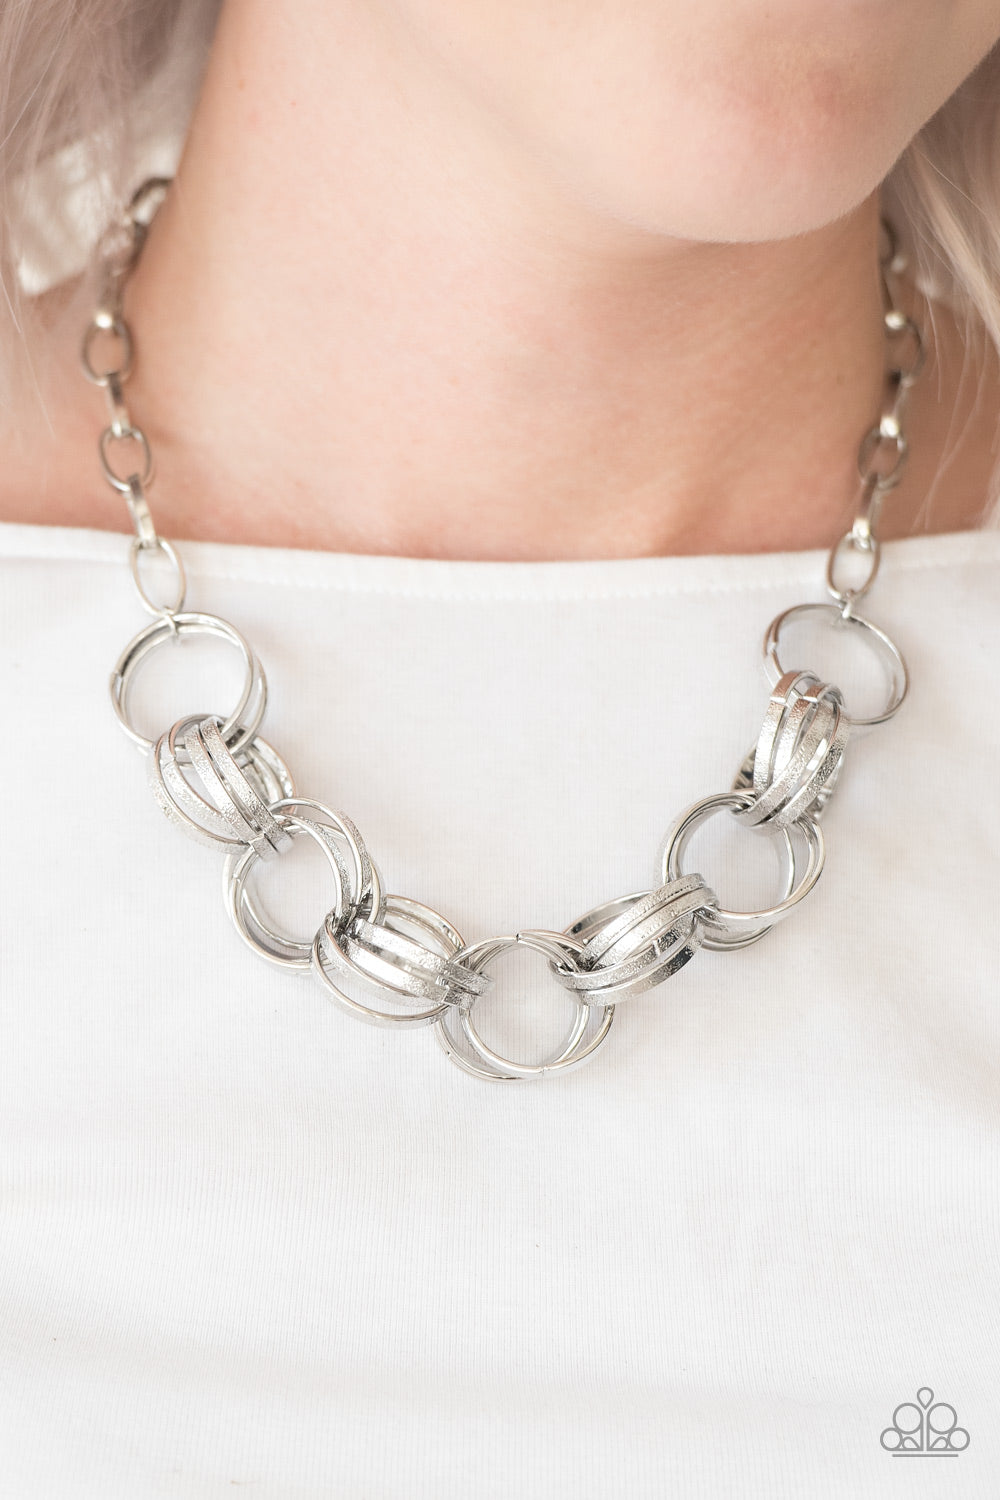 Statement Made - Silver Necklace - TheMasterCollection